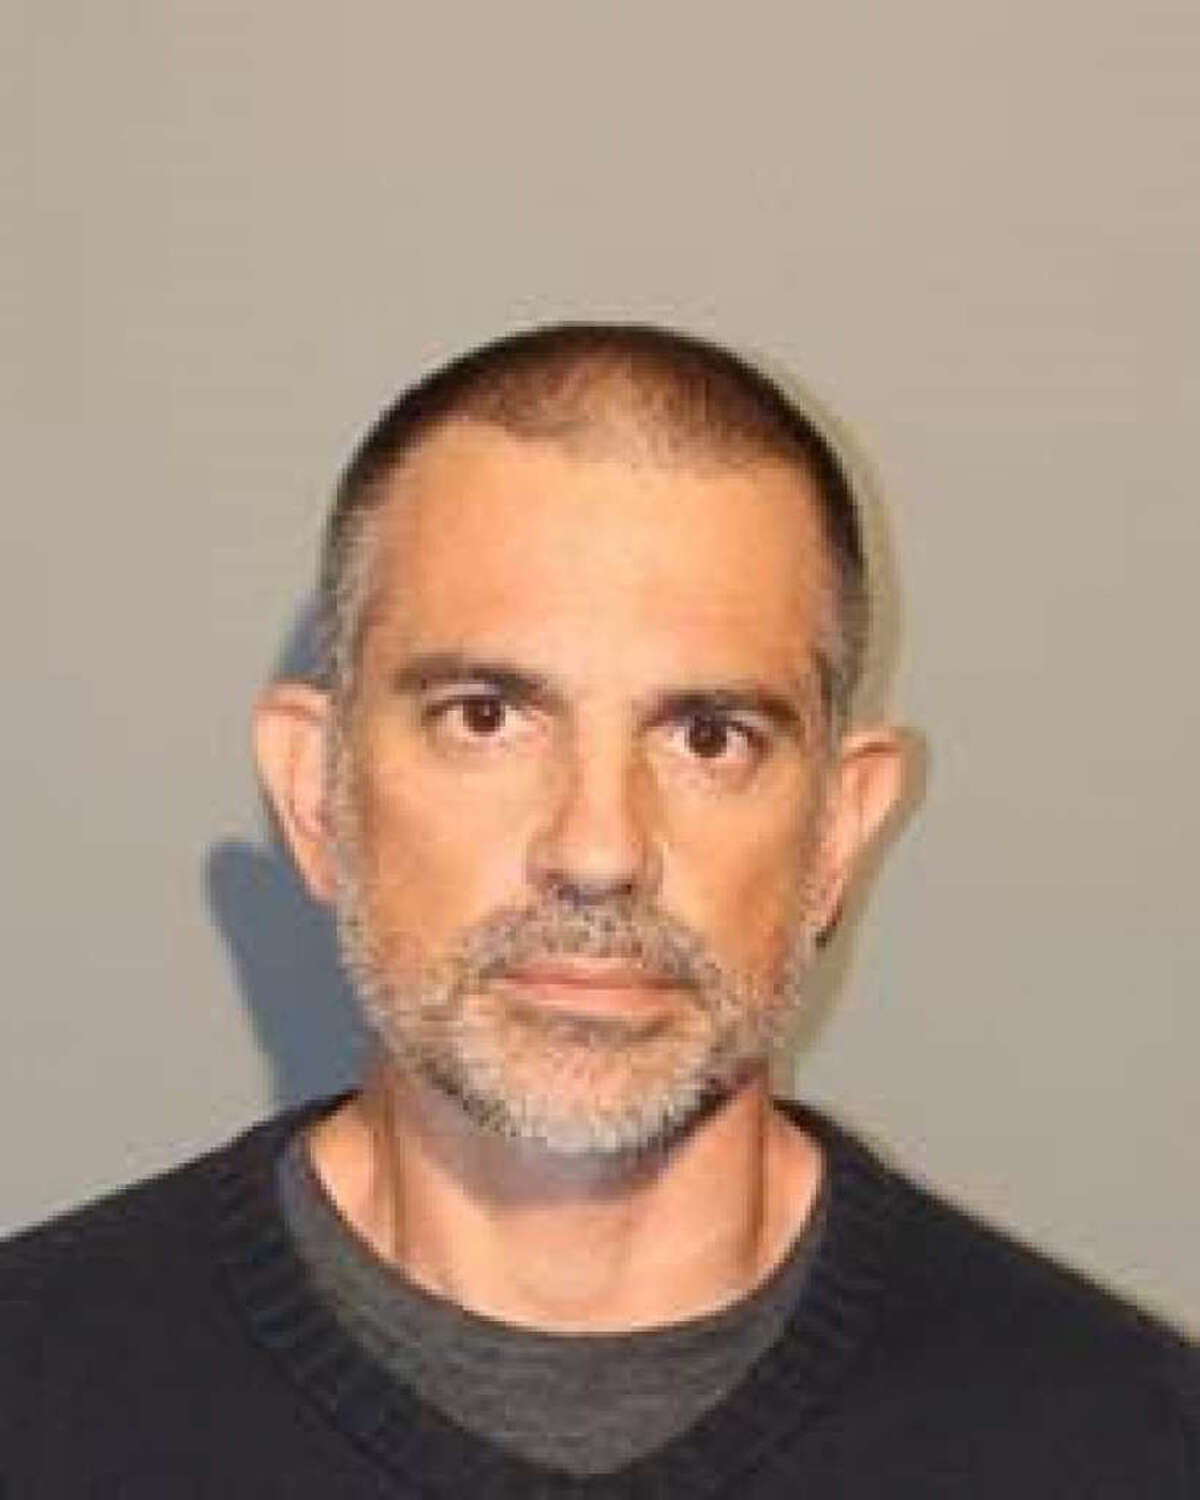 Fotis Dulos, 51, was arrested in connection with the disappearance of his estranged wife, Jennifer Dulos, a New Canaan mother of five. Fotis Dulos was charged with tampering with or fabricating physical evidence and hindering prosecution in the first degree. Photo: New Canaan Police / Contributed Photo